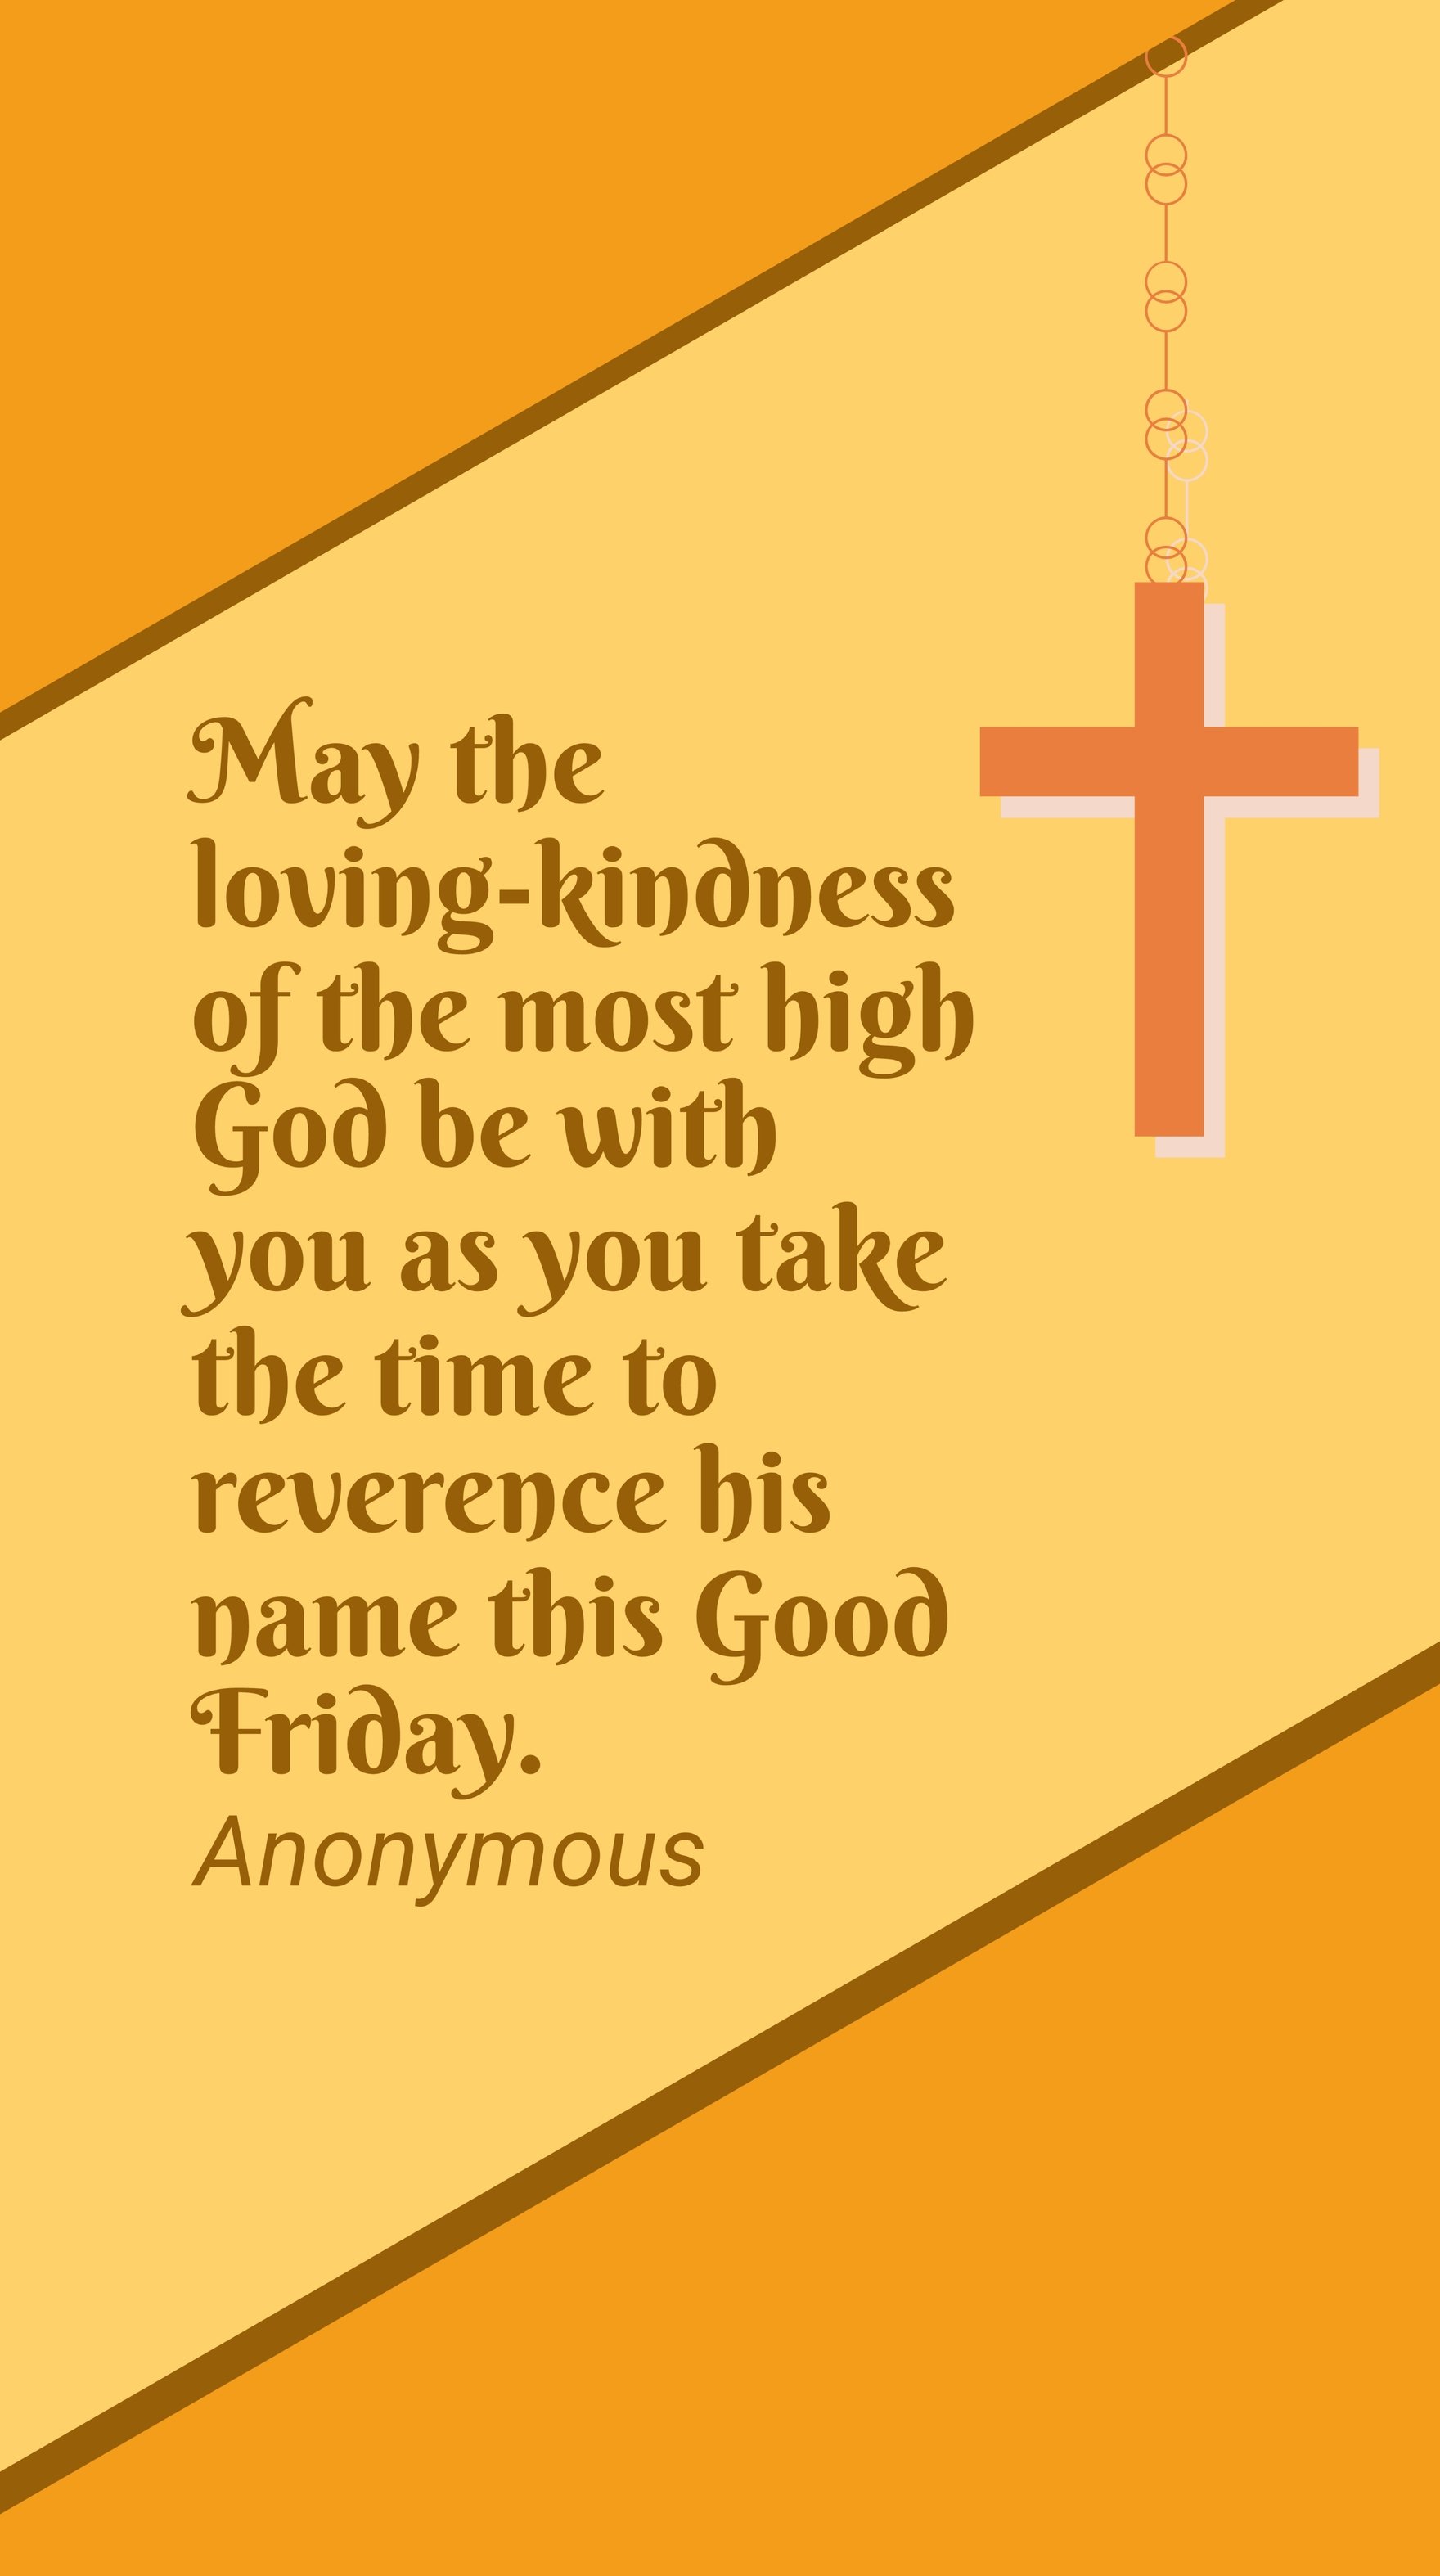 Free Anonymous - May the loving-kindness of the most high God be with you as you take the time to reverence his name this Good Friday.